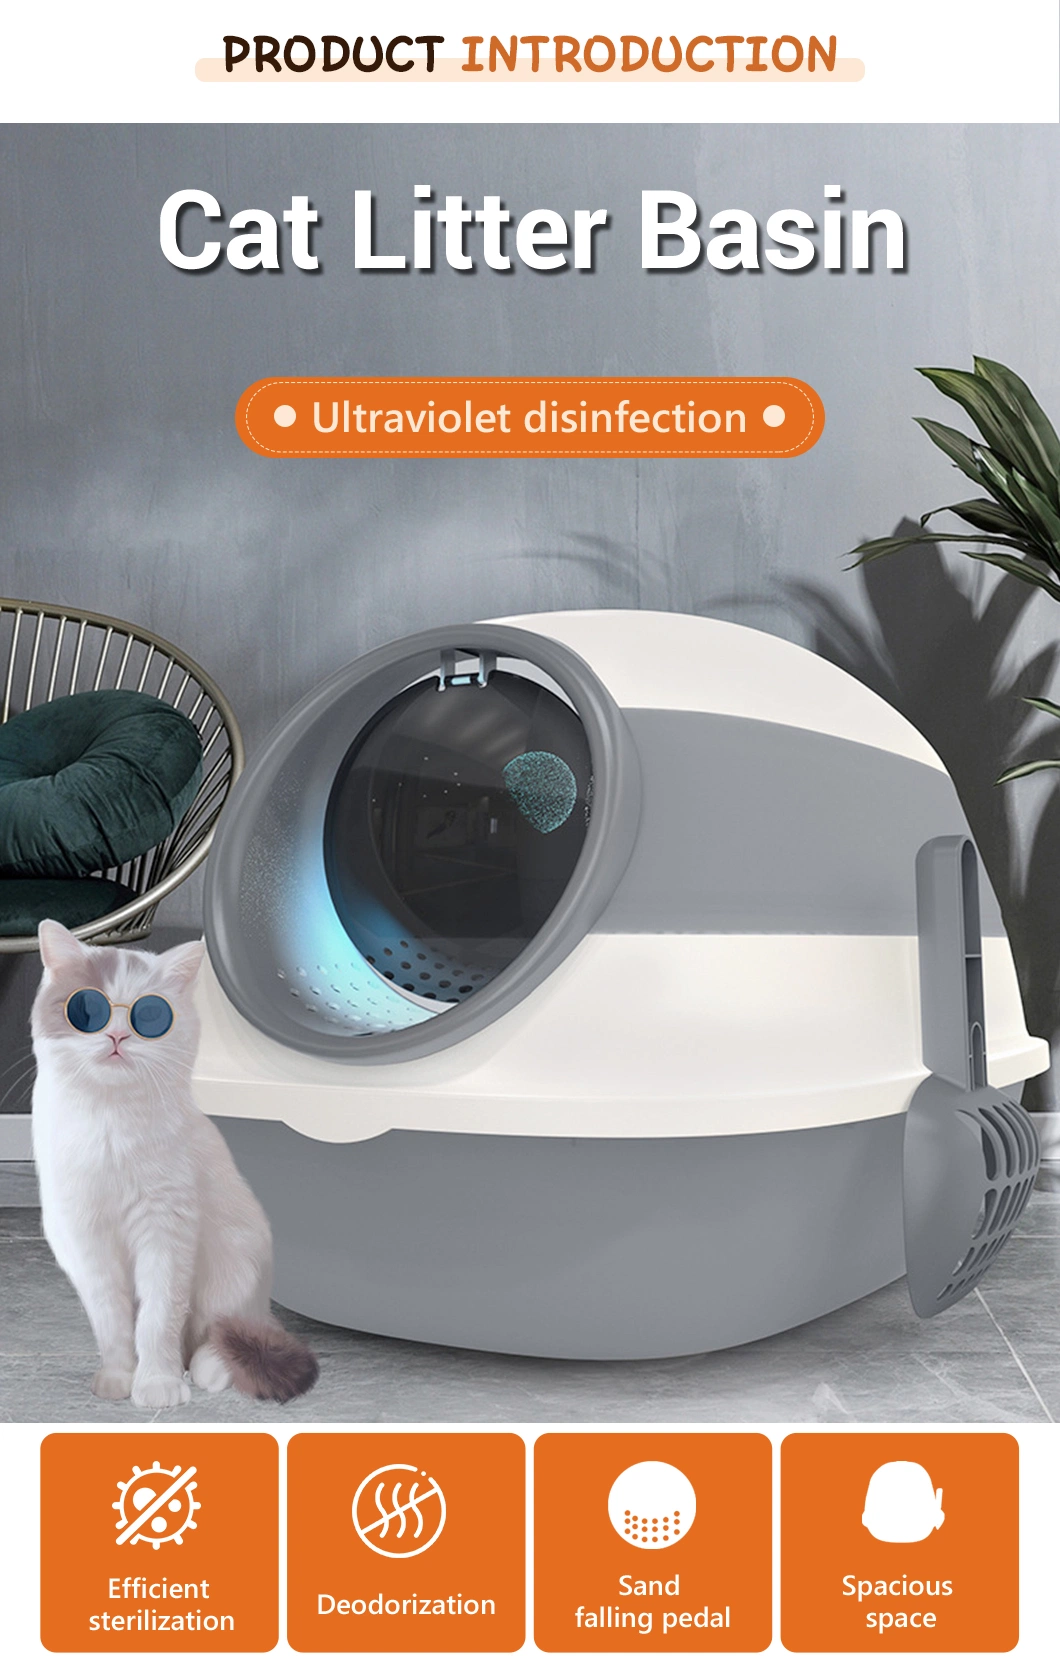 Multicolored Fully Enclosed Toilet Cat Litter Box